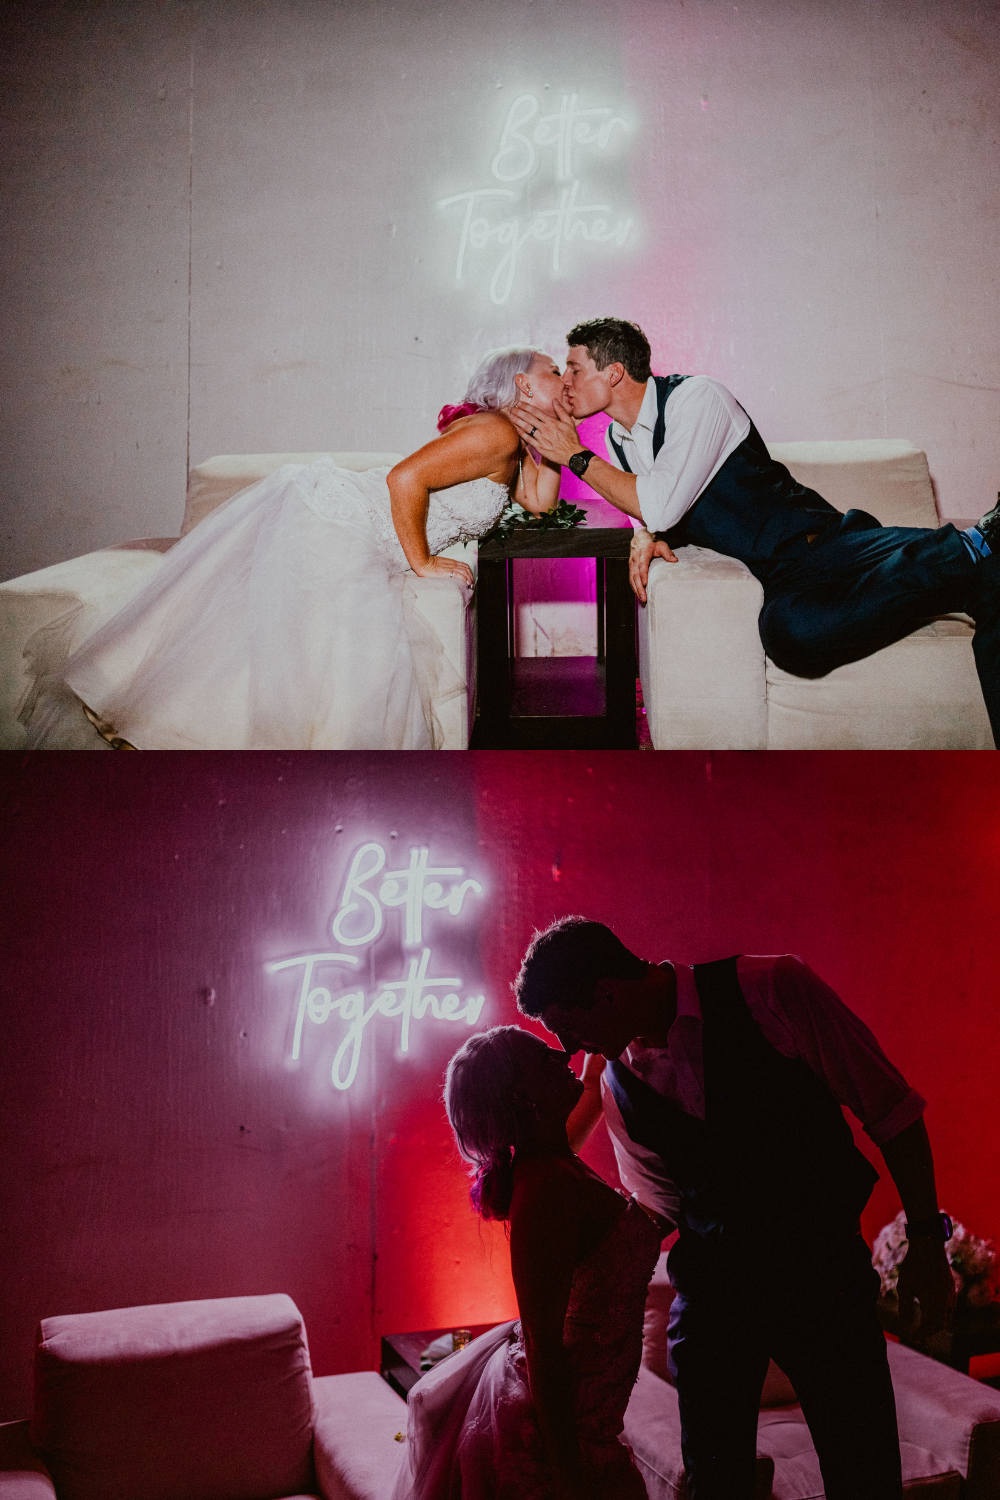 Moody wedding decor inspiration of LED sign saying better together while newlyweds kiss underneath the sign | Oahu Wedding Photographer, Oahu Elopement Photographer, Destination Wedding Photographer, Destination Elopement Photographer, Newlywed moments ideas, Newlywed Photography inspiration, Hawaii Elopement ideas | chelseaabril.com